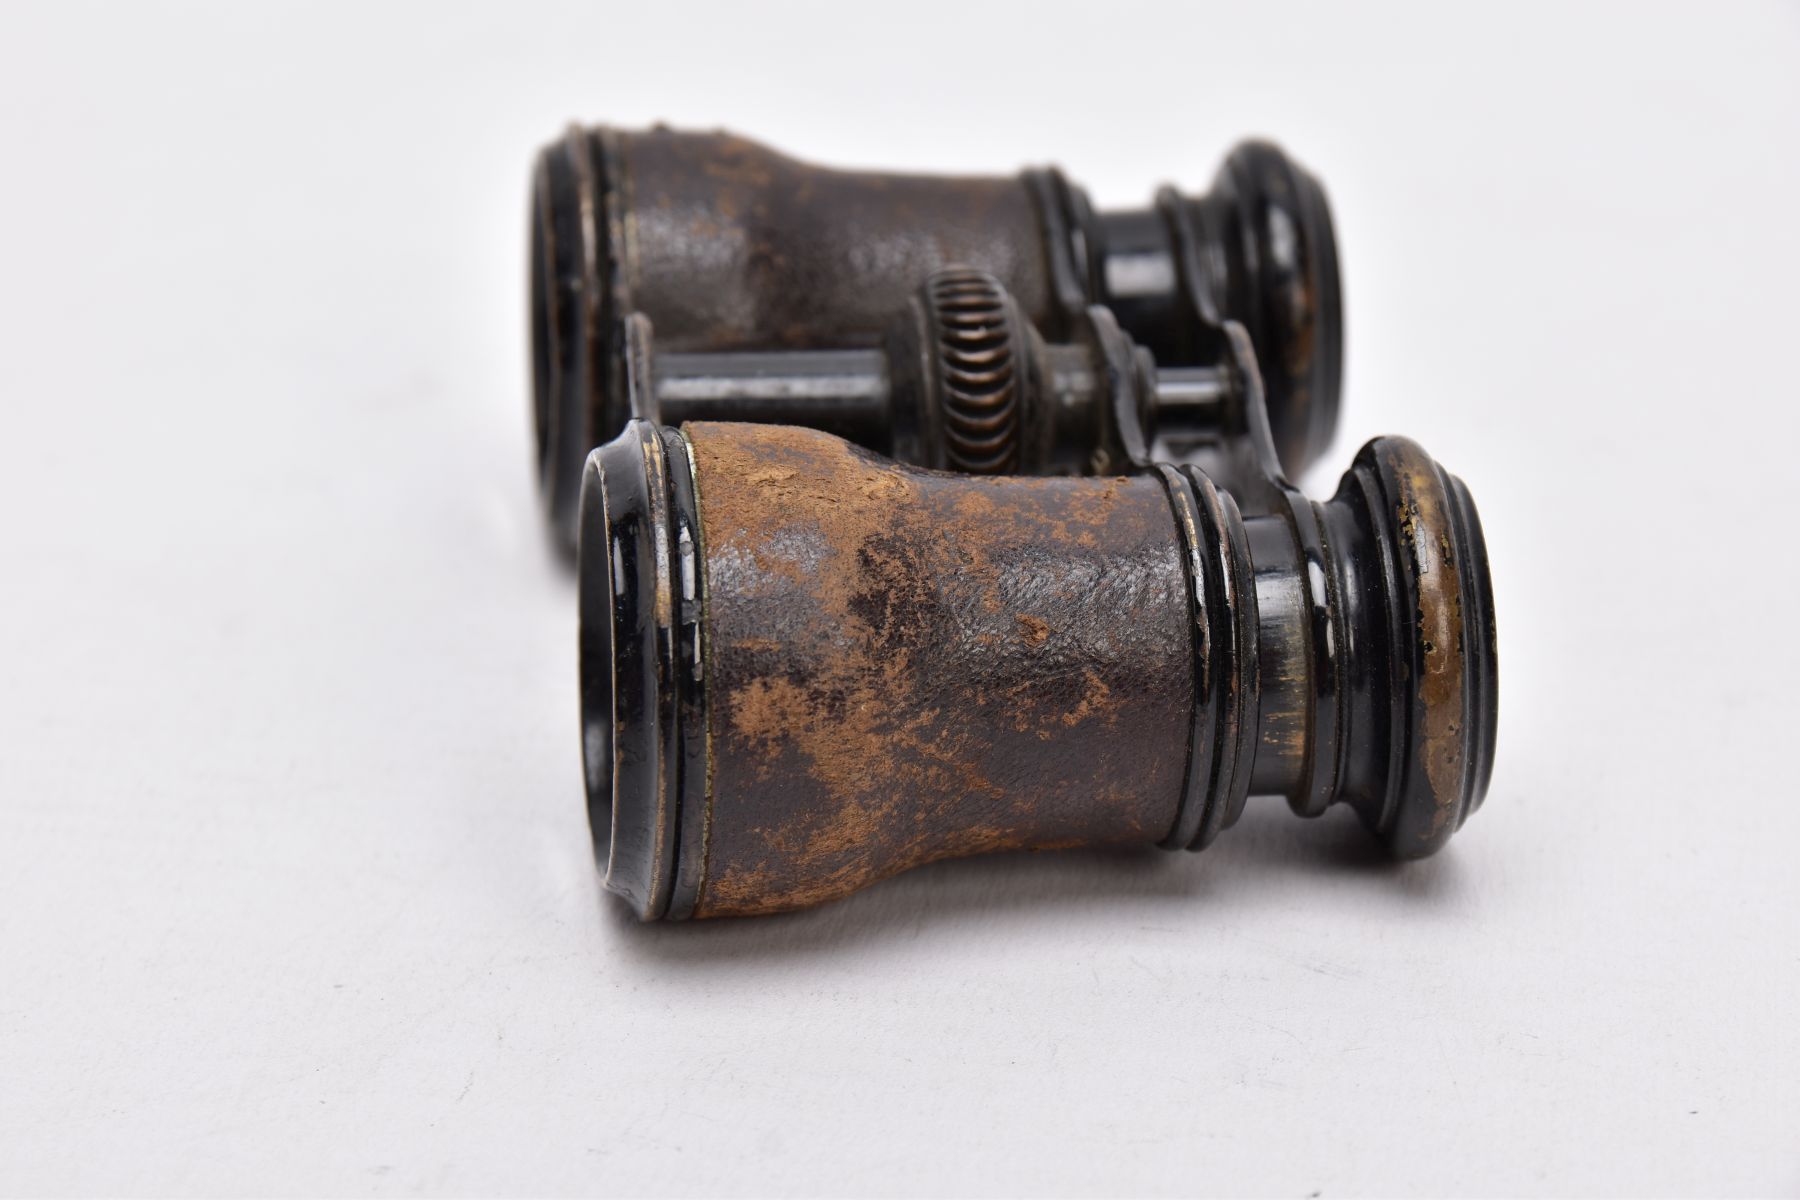 A PAIR OF EARLY 20TH CENTURY OPERA GLASSES, leather cased objective barrels, central focus wheel - Image 5 of 6